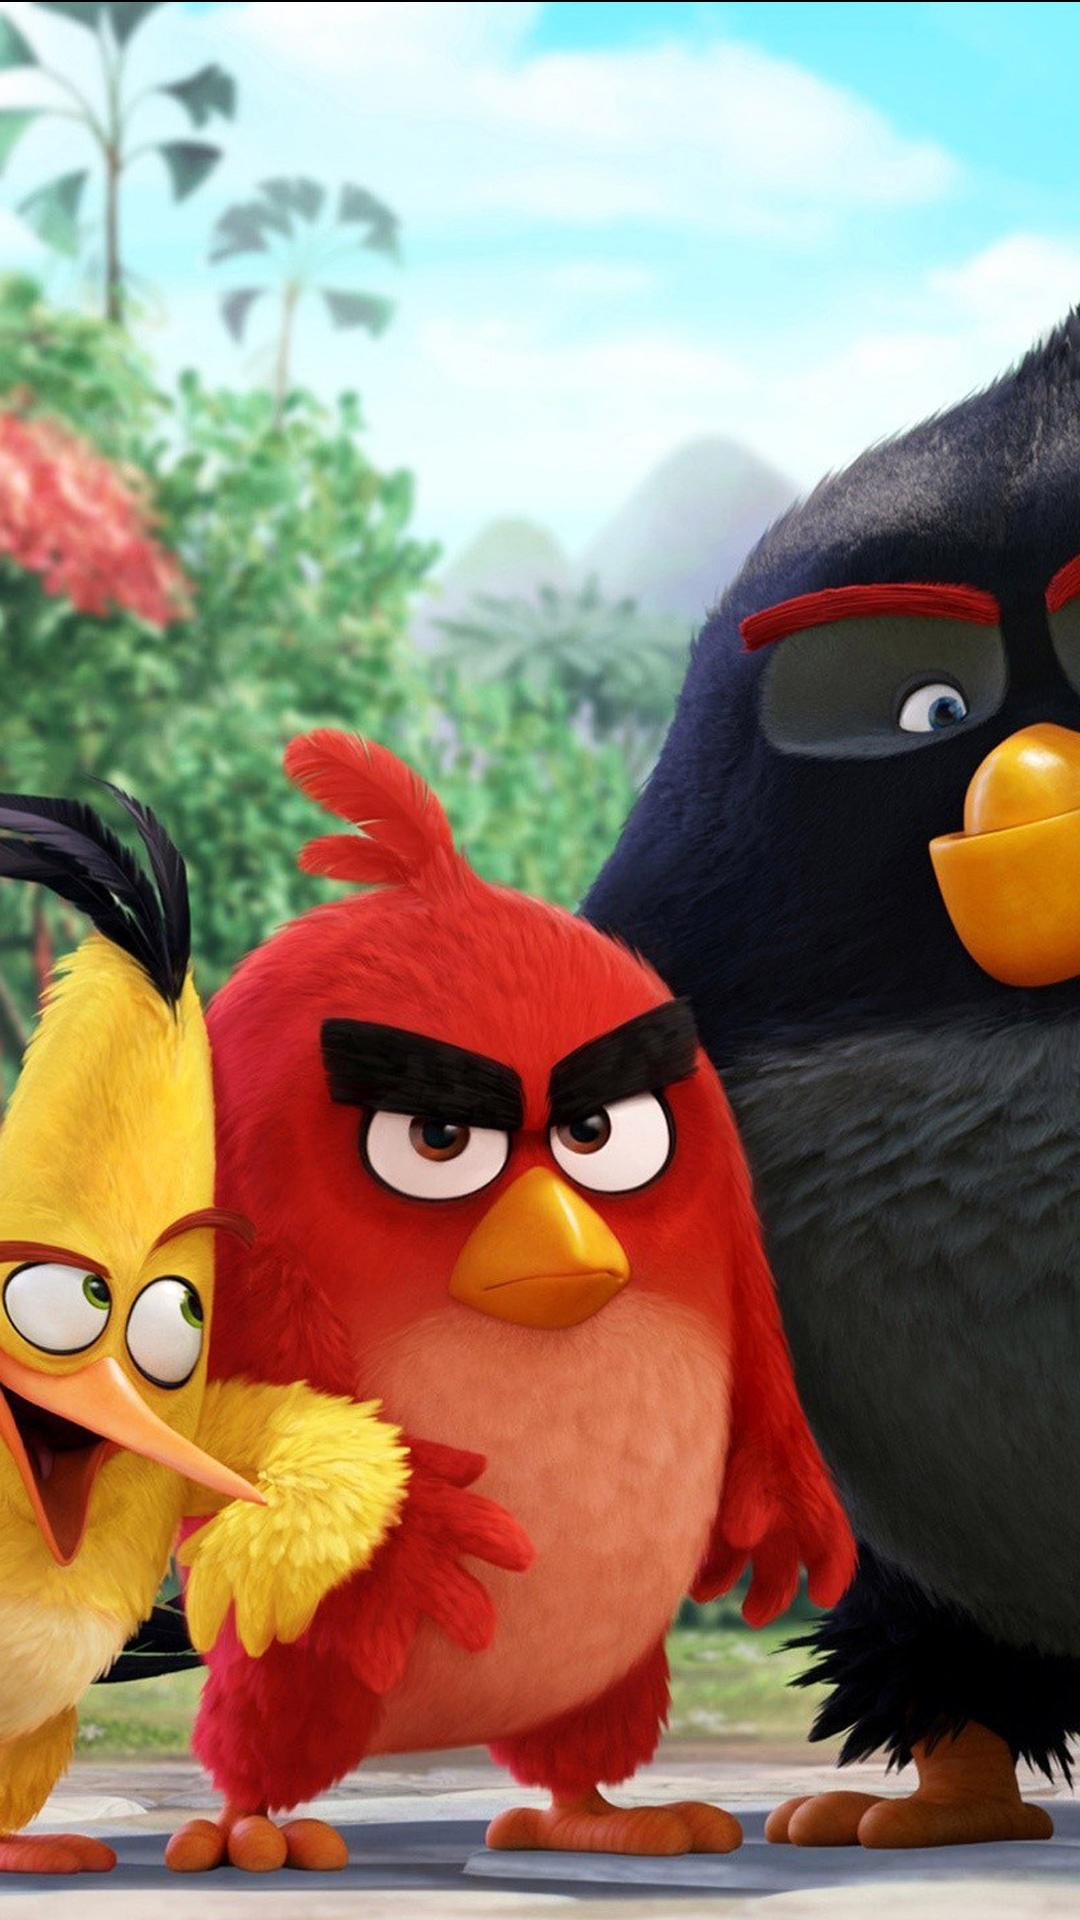 Angry Birds Movie Characters Android Wallpaper free download